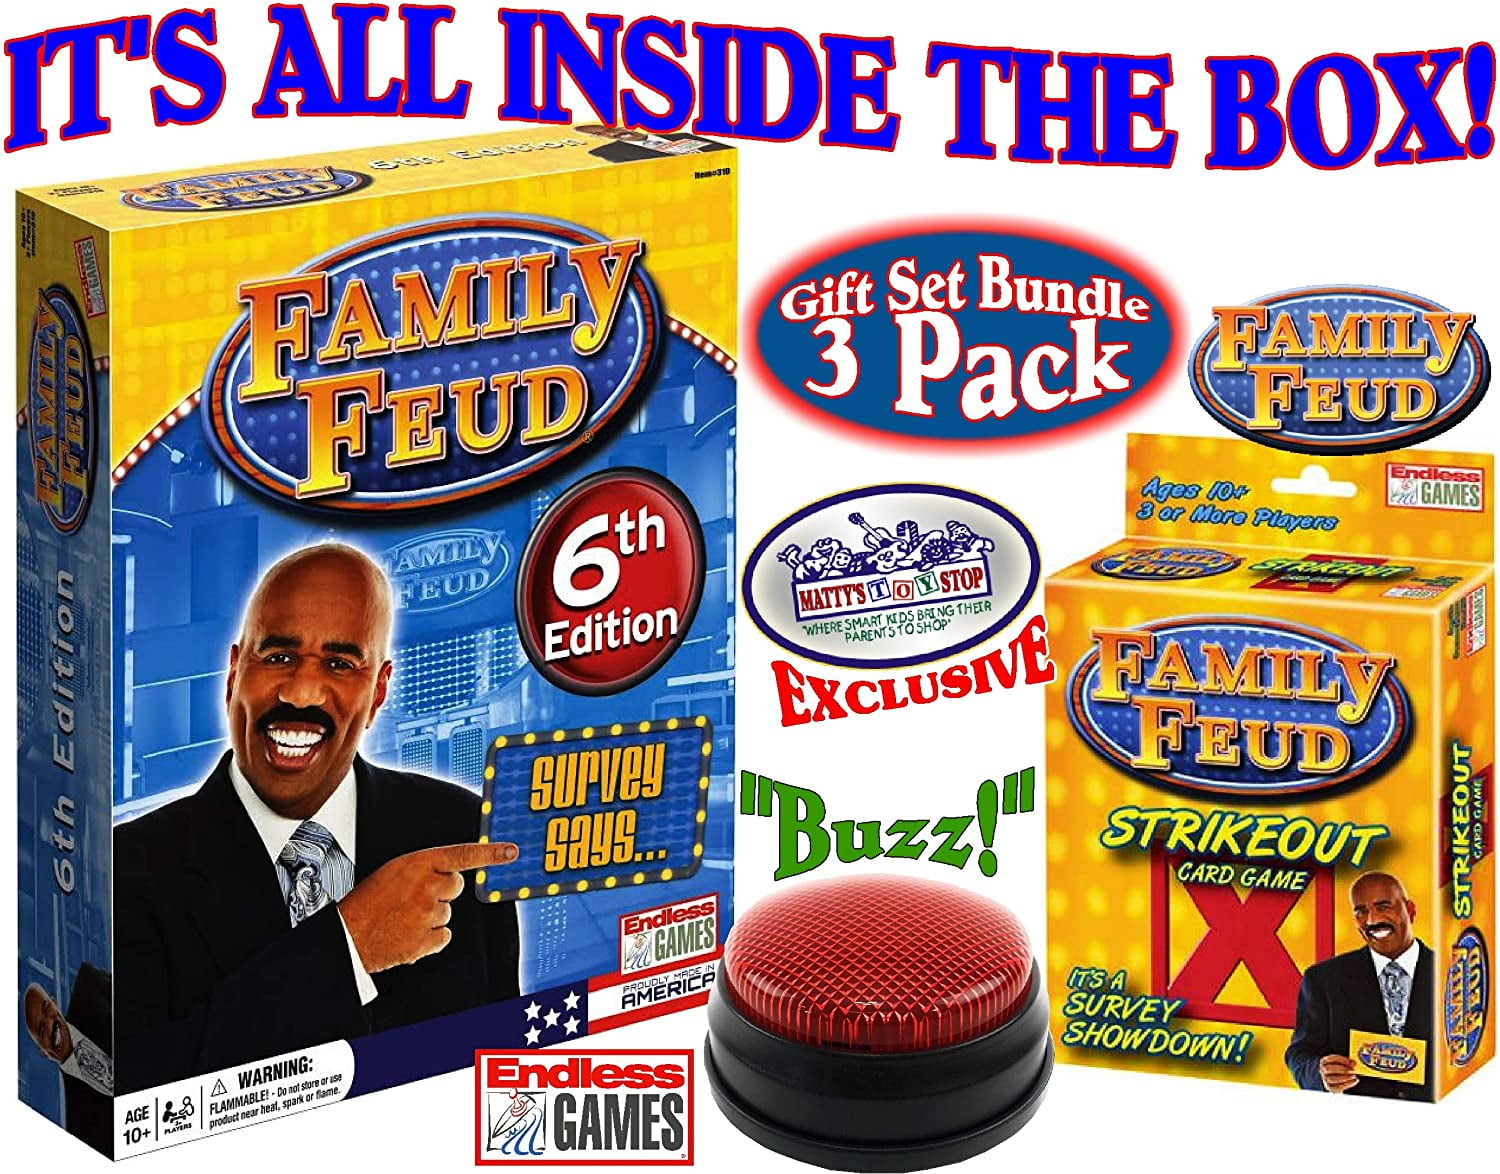 Endless Games Family Feud 6th Edition Set Bundle Includes Strikeout Card Game for sale online 